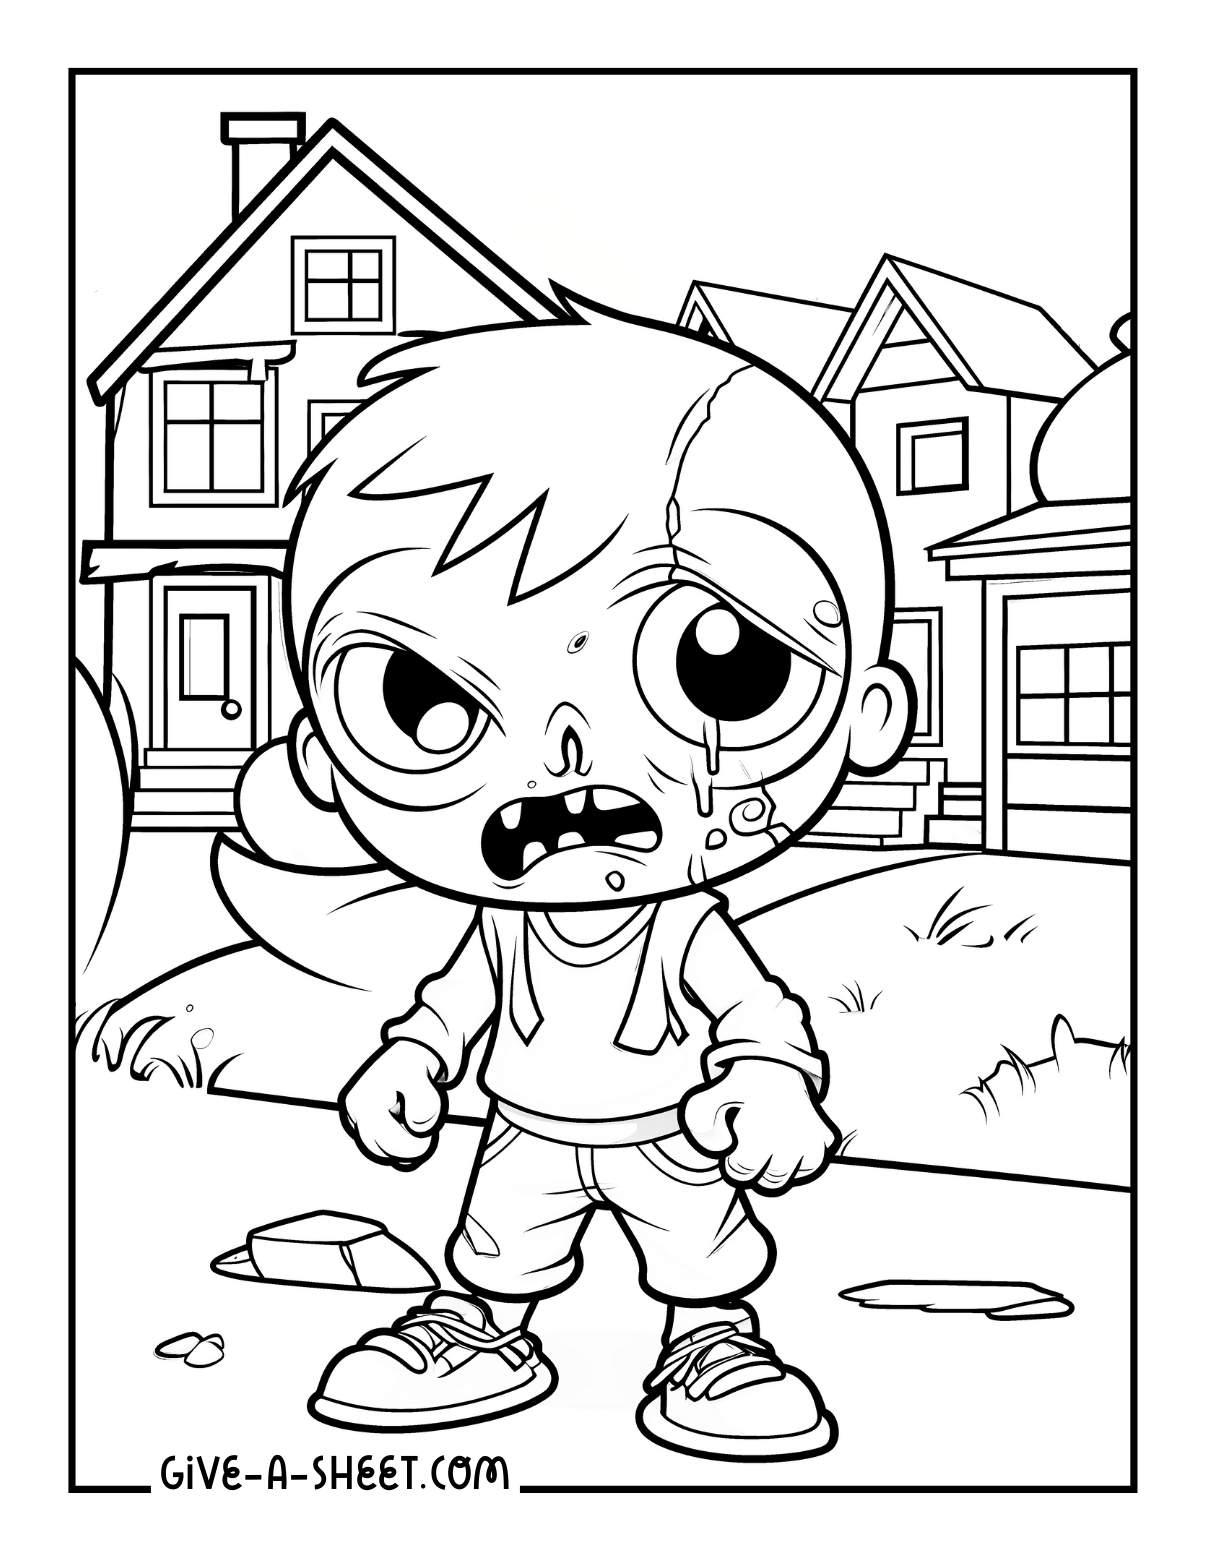 Zombie apocalypse coloring page for kids.